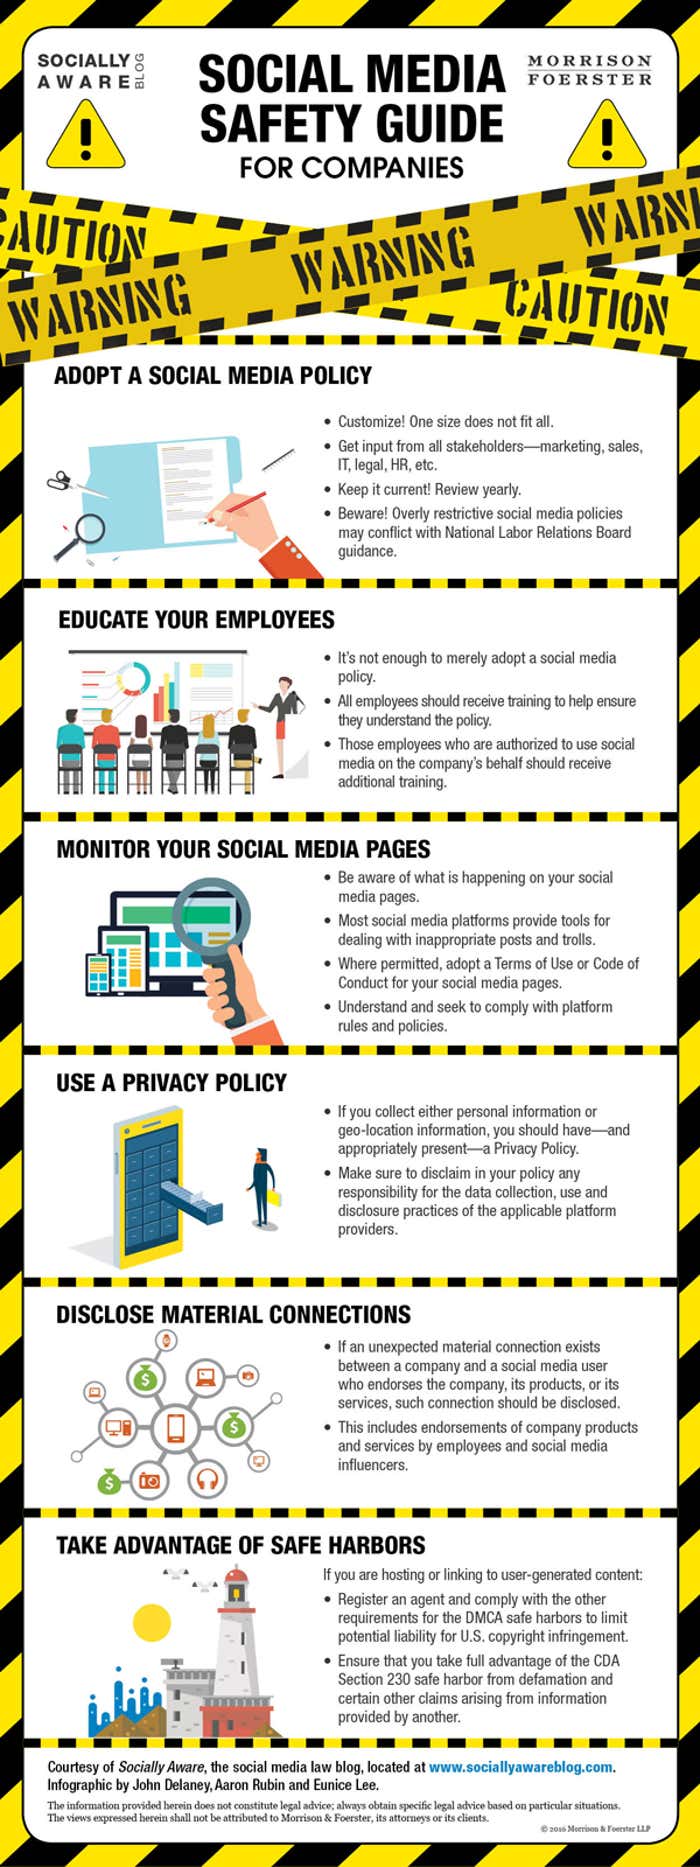 Social Media Safety Guide for Companies